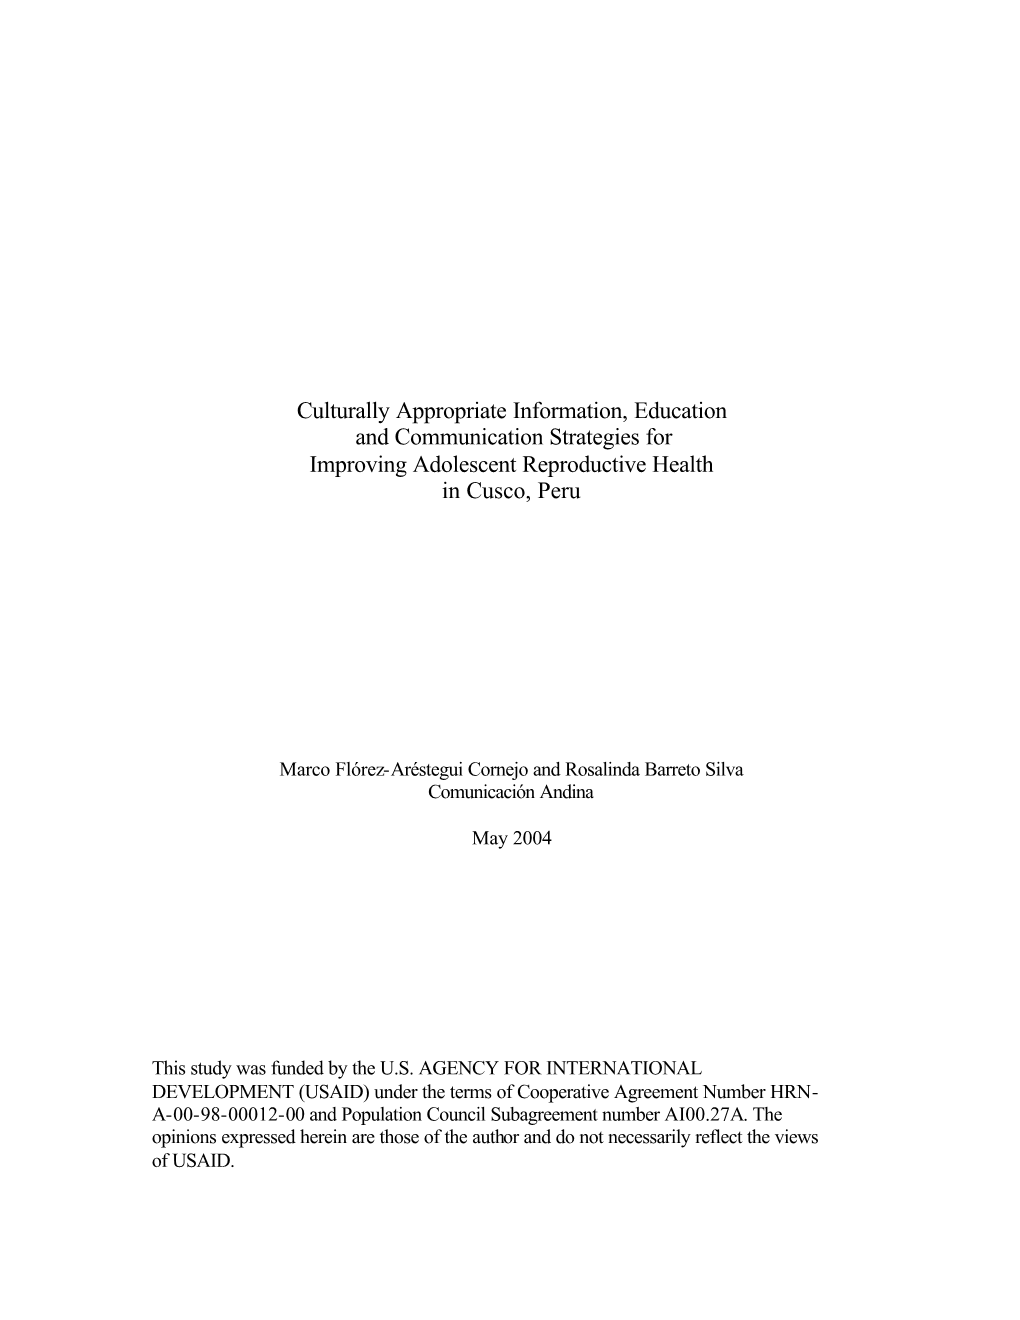 Culturally Appropriate Information, Education and Communication Strategies for Improving Adolescent Reproductive Health in Cusco, Peru